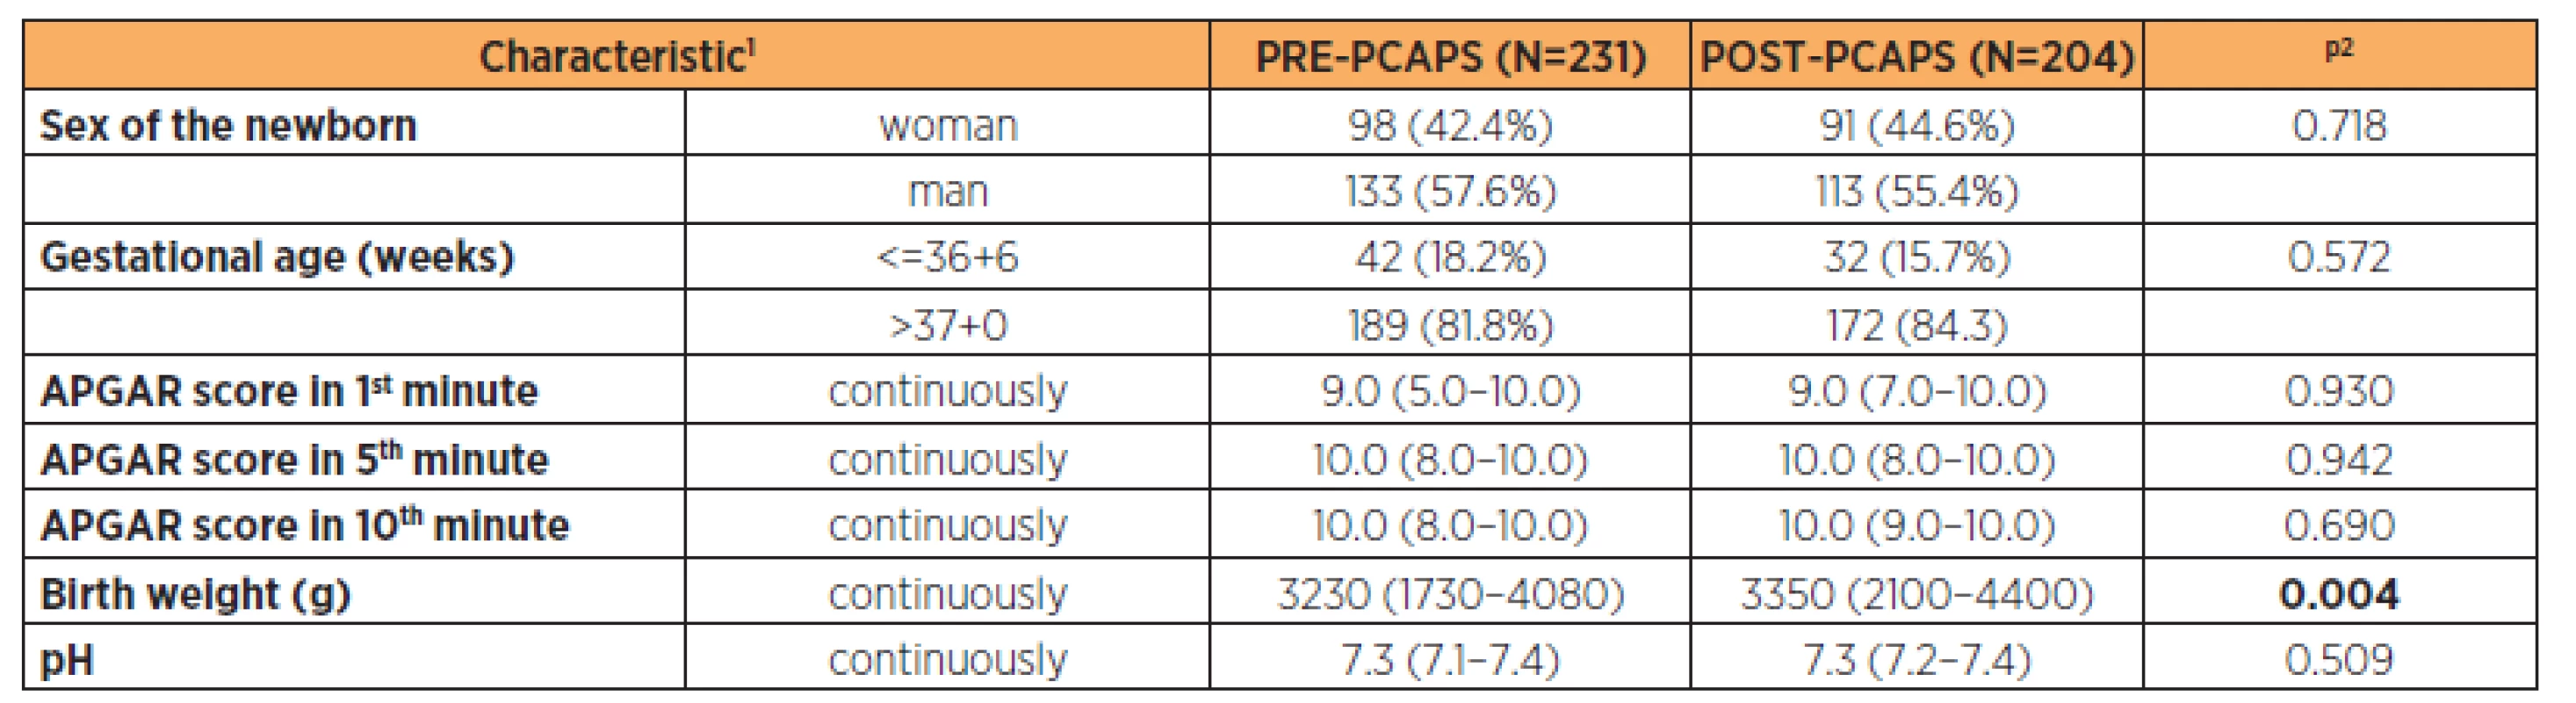 Newborn characteristics of both PRE-PCAPS and POST-PCAPS group